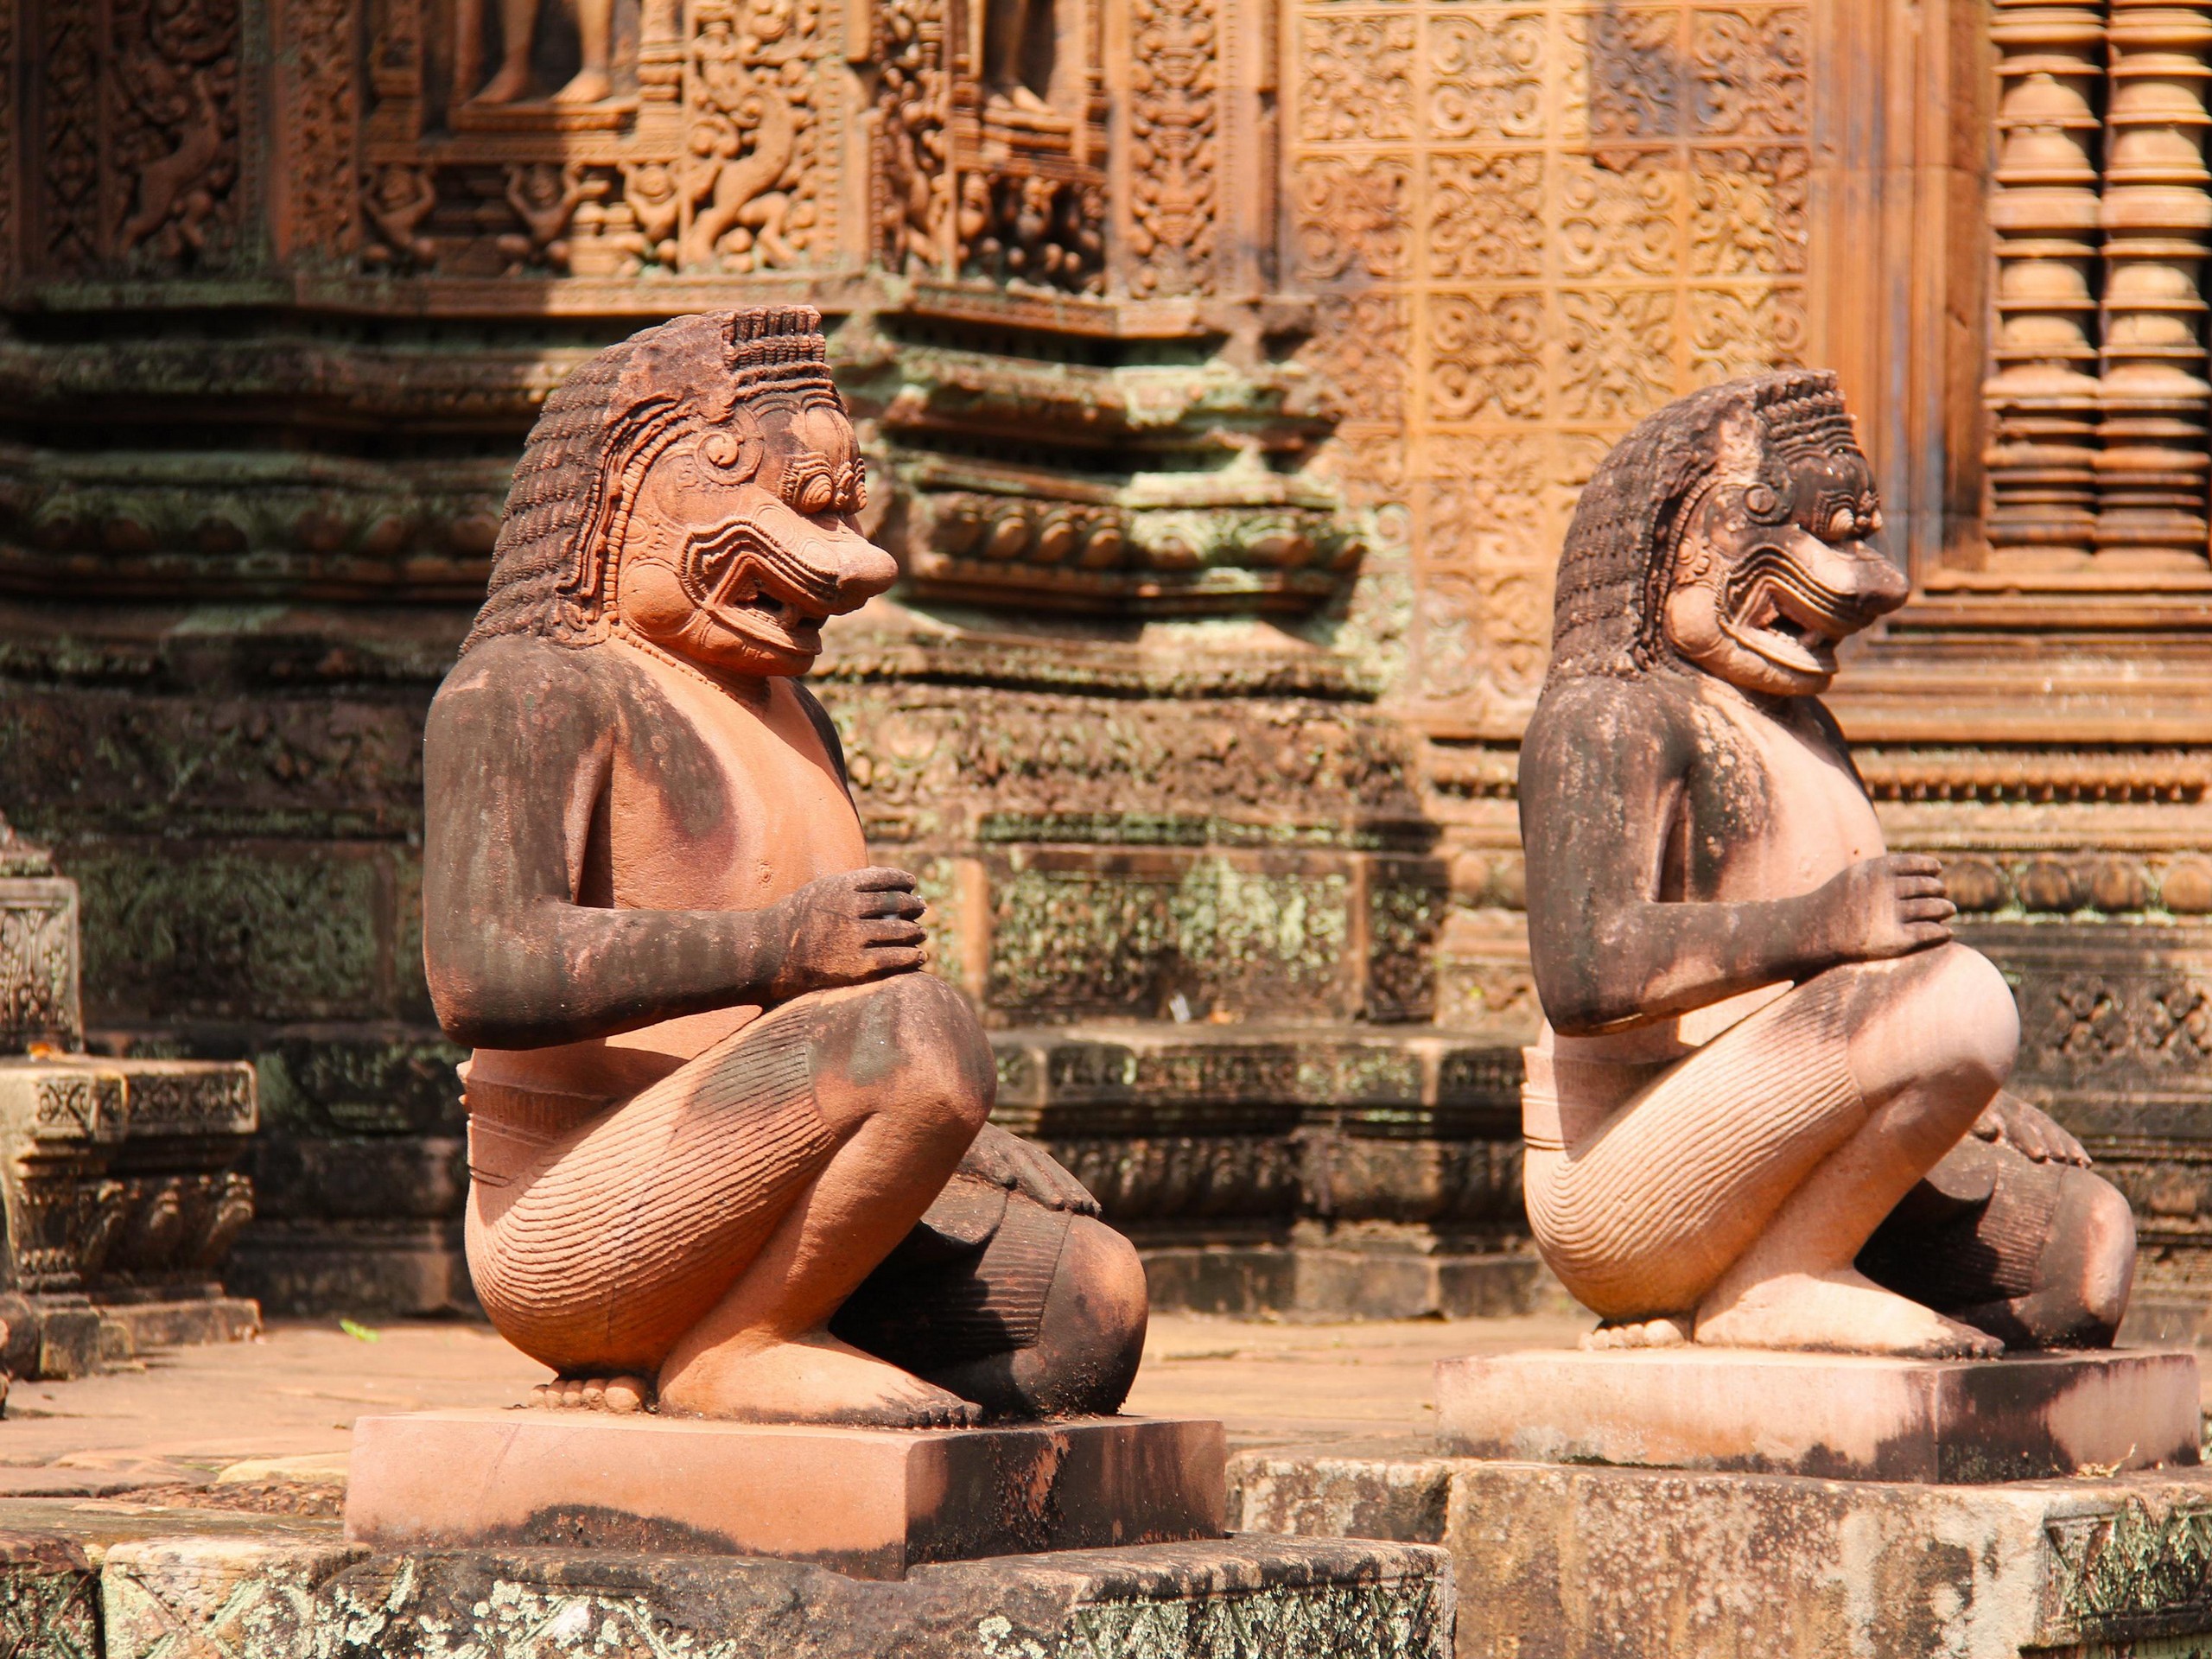 Beautiful statues in Angkor Wat complex, seen while on a self-guided tour